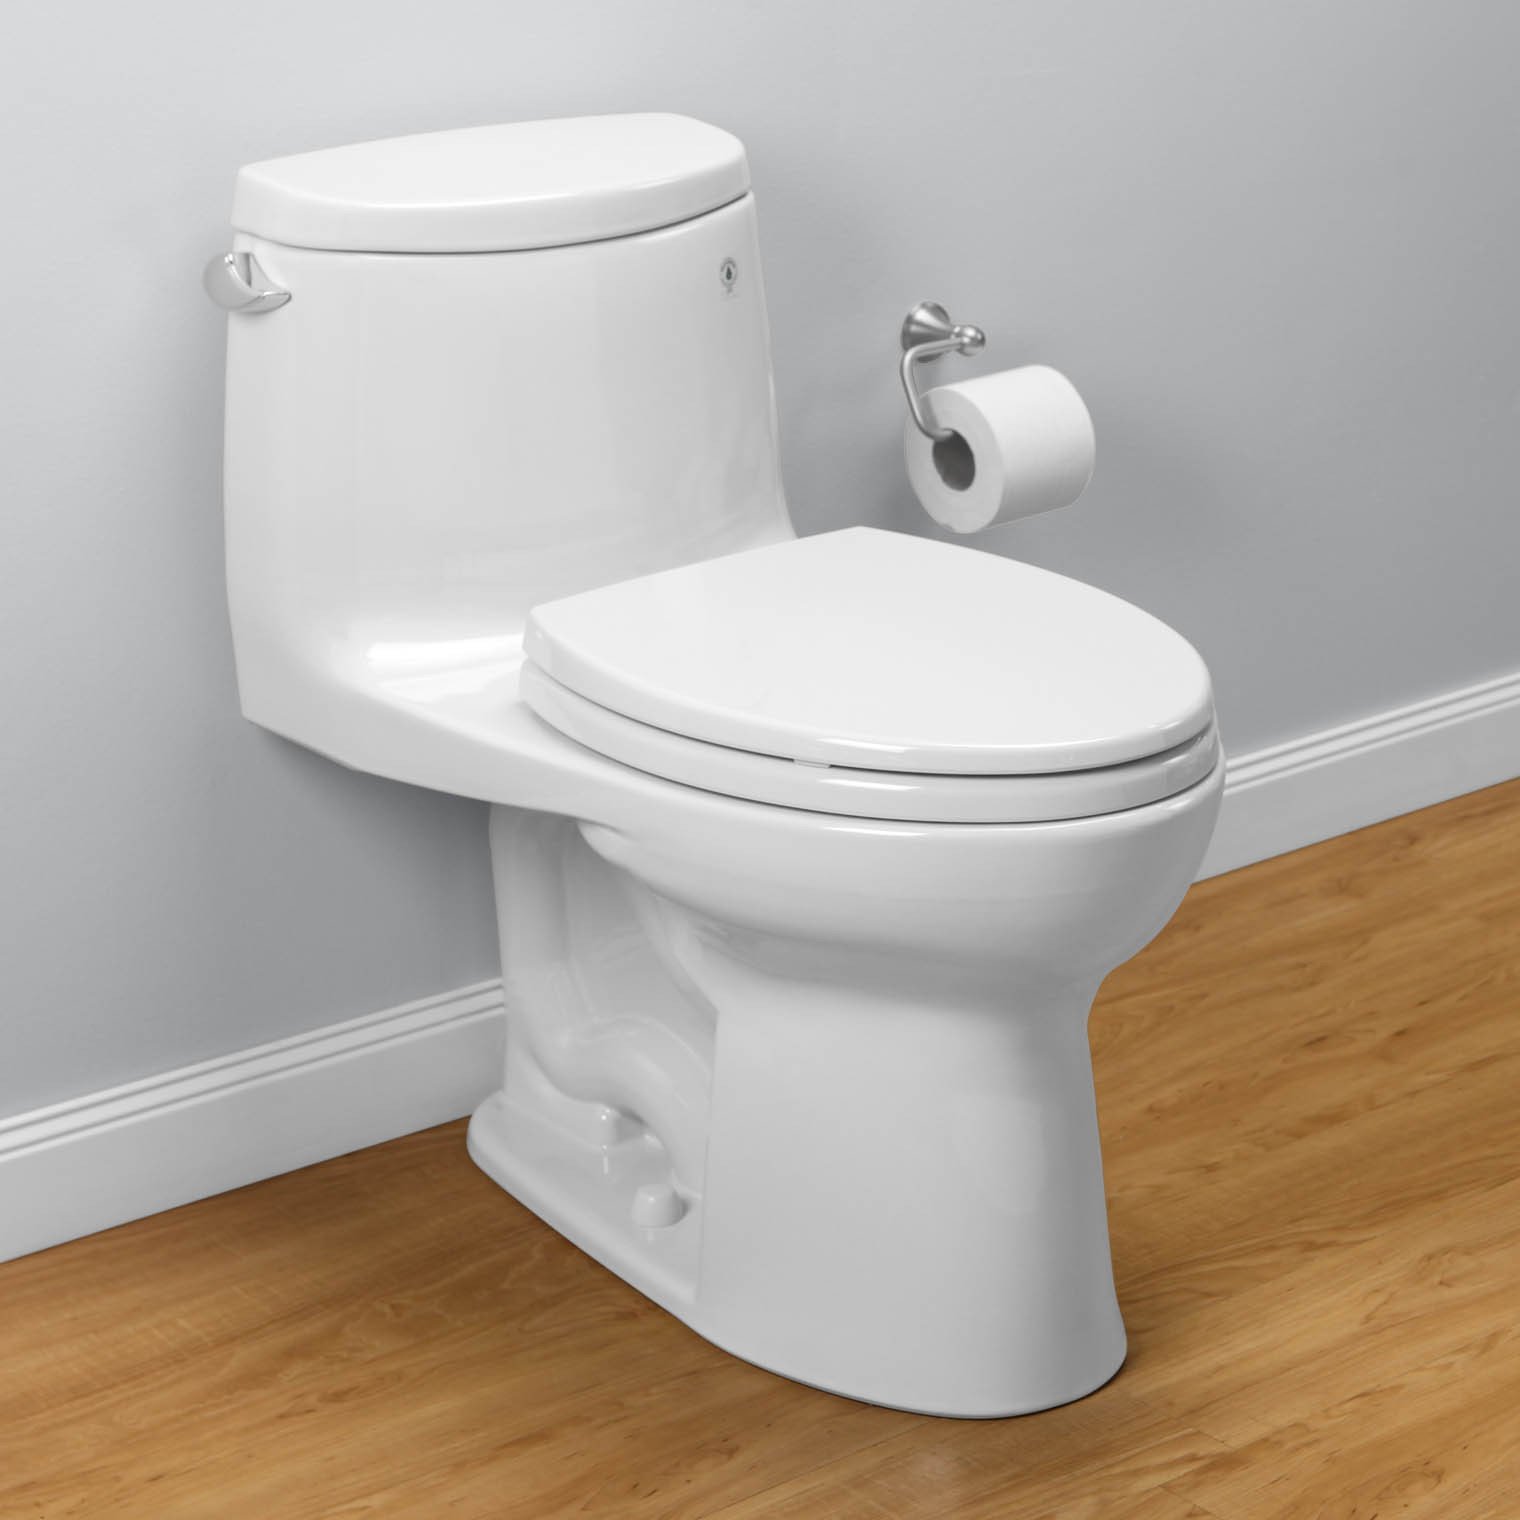 Toto Ultramax Ii Review Is It Worth Buying Shop Toilet